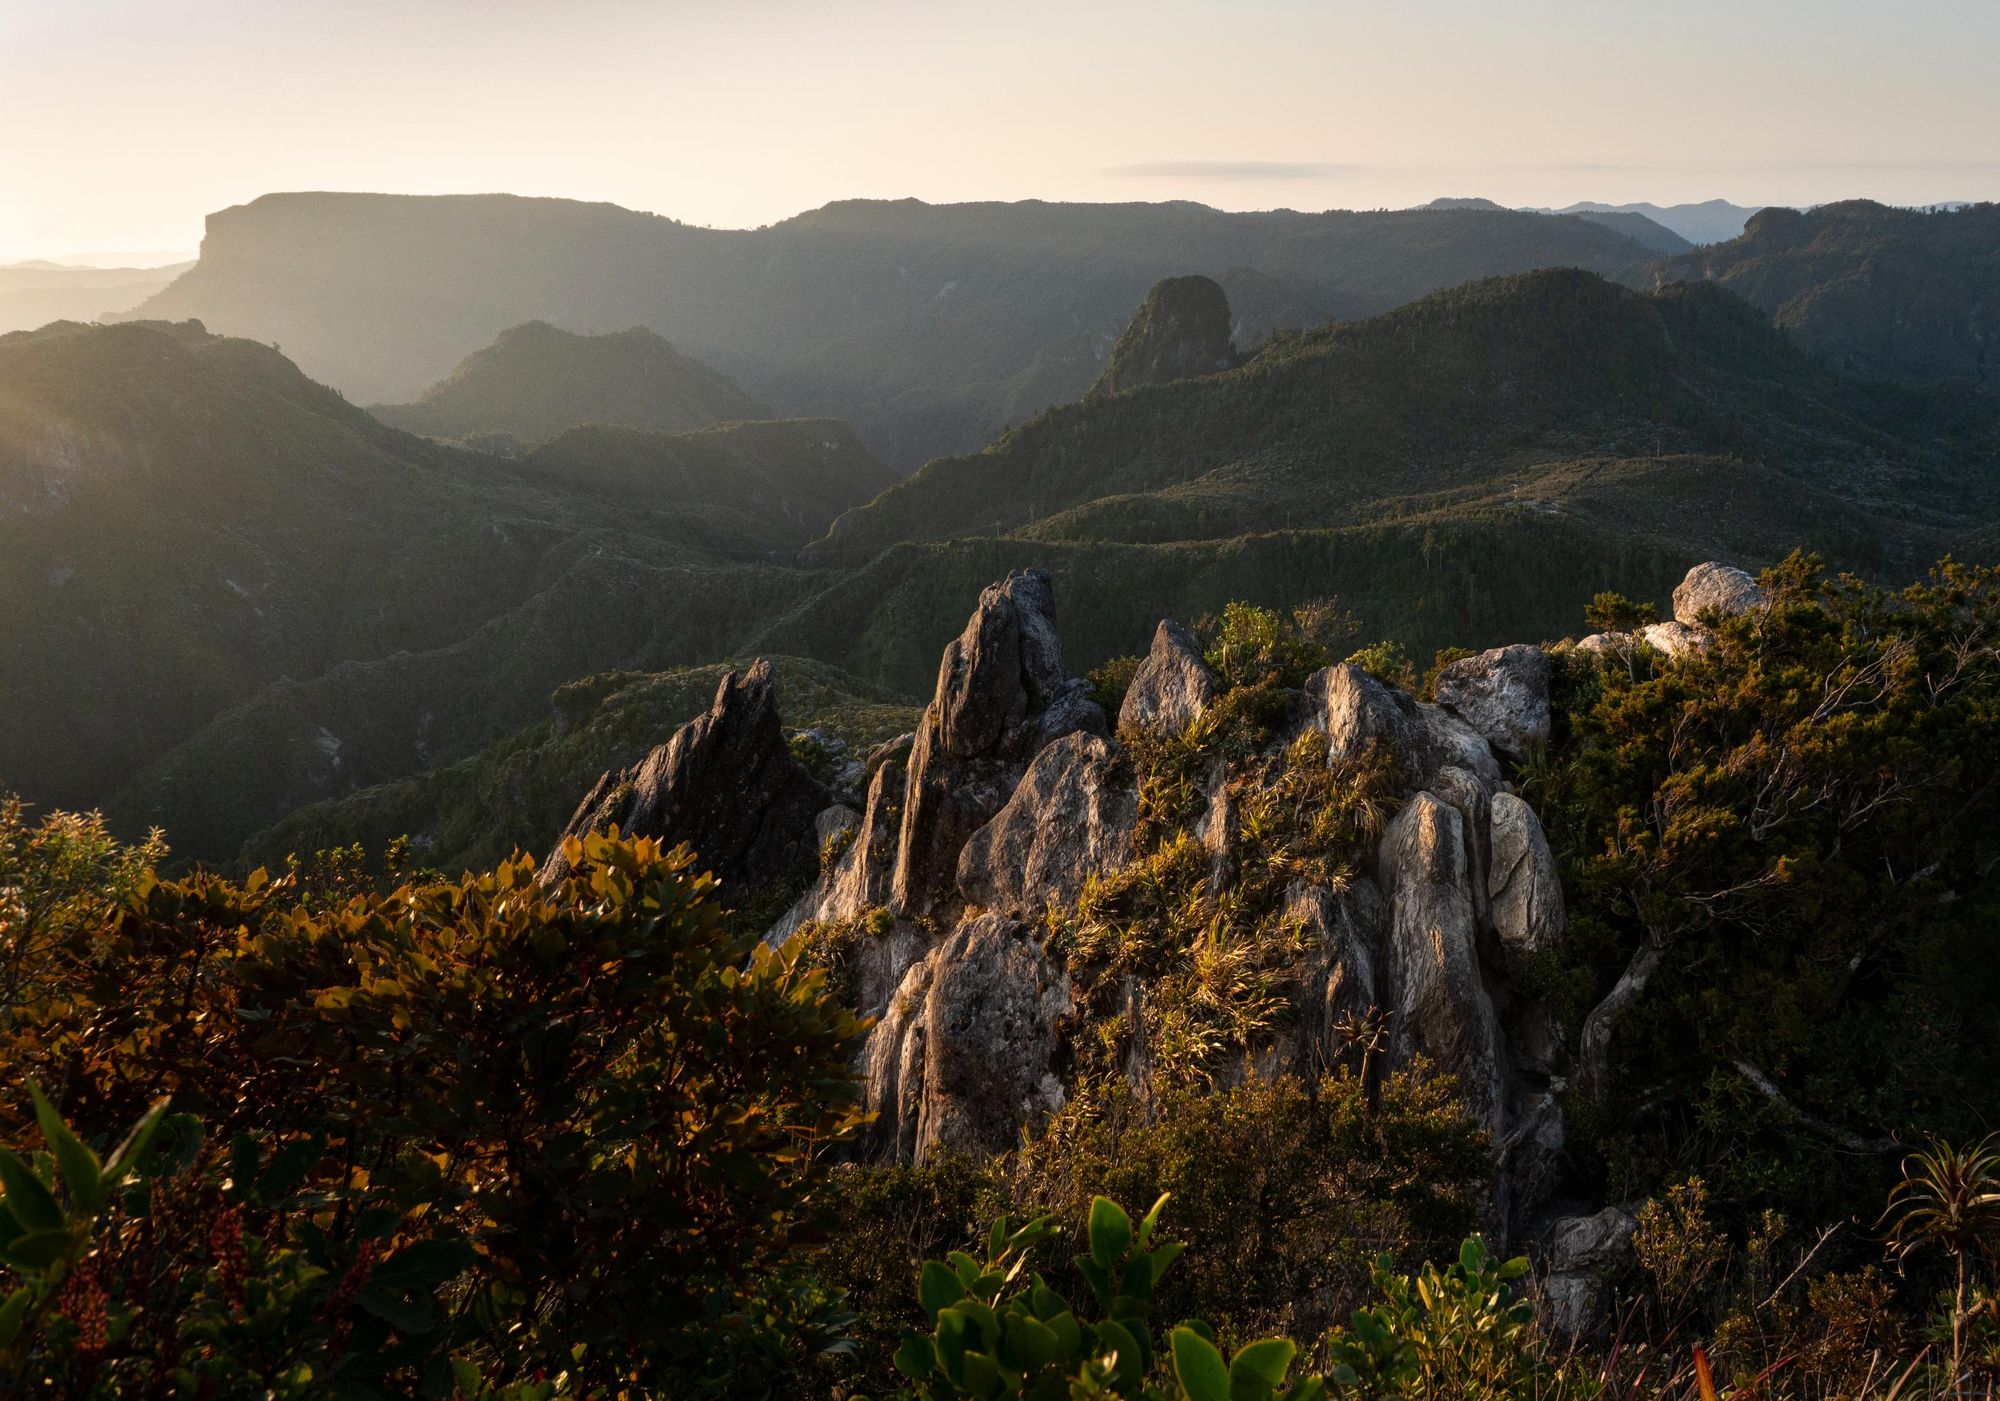 Setting sun lit up the valleys of the Pinnacles, Coromandel, New Zealand. Photo: Getty